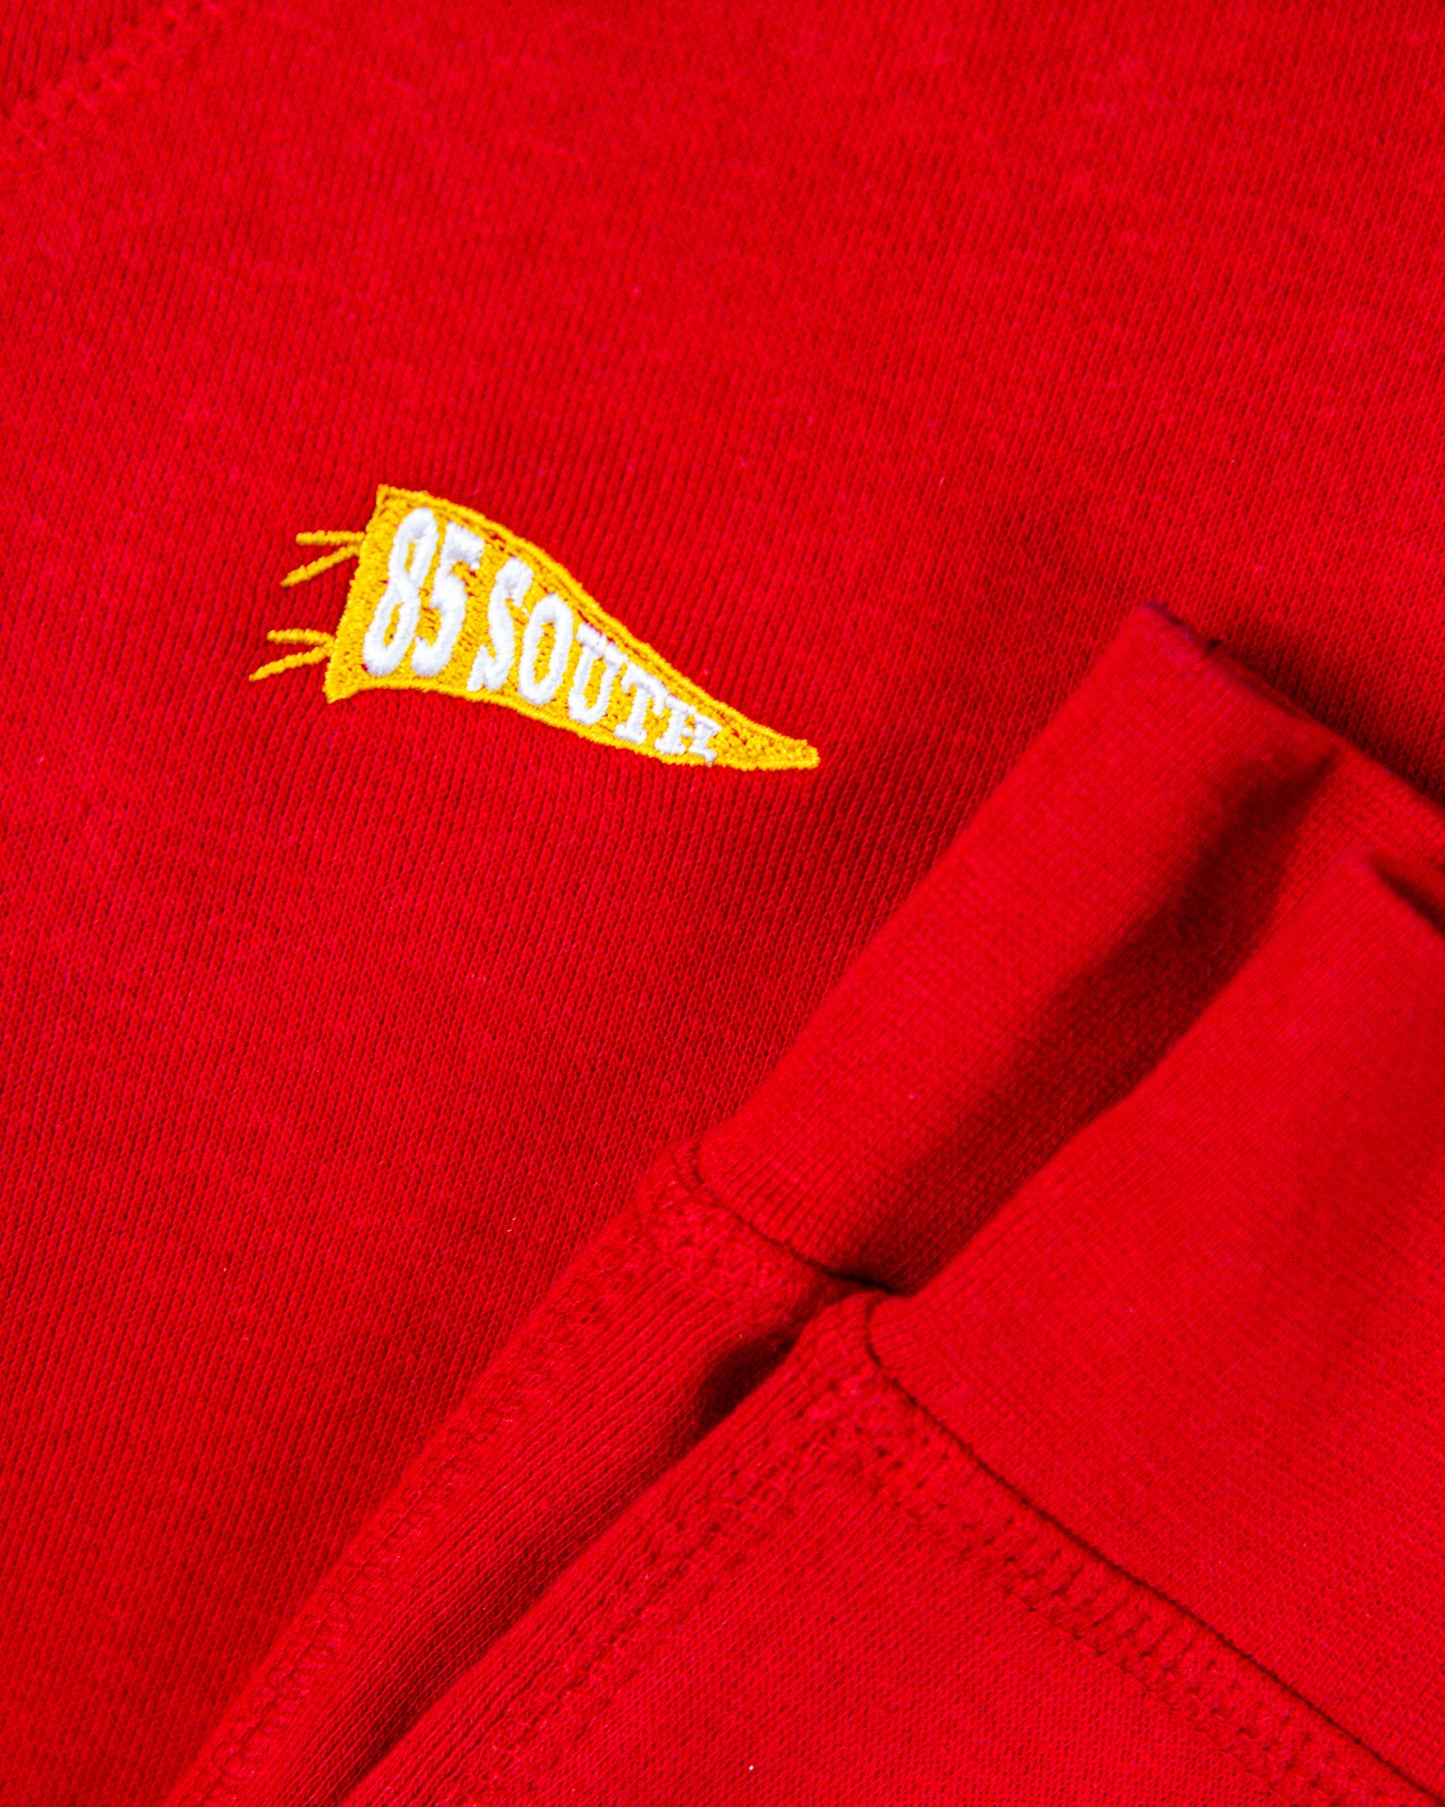 Team 85 Away Jogger - Red